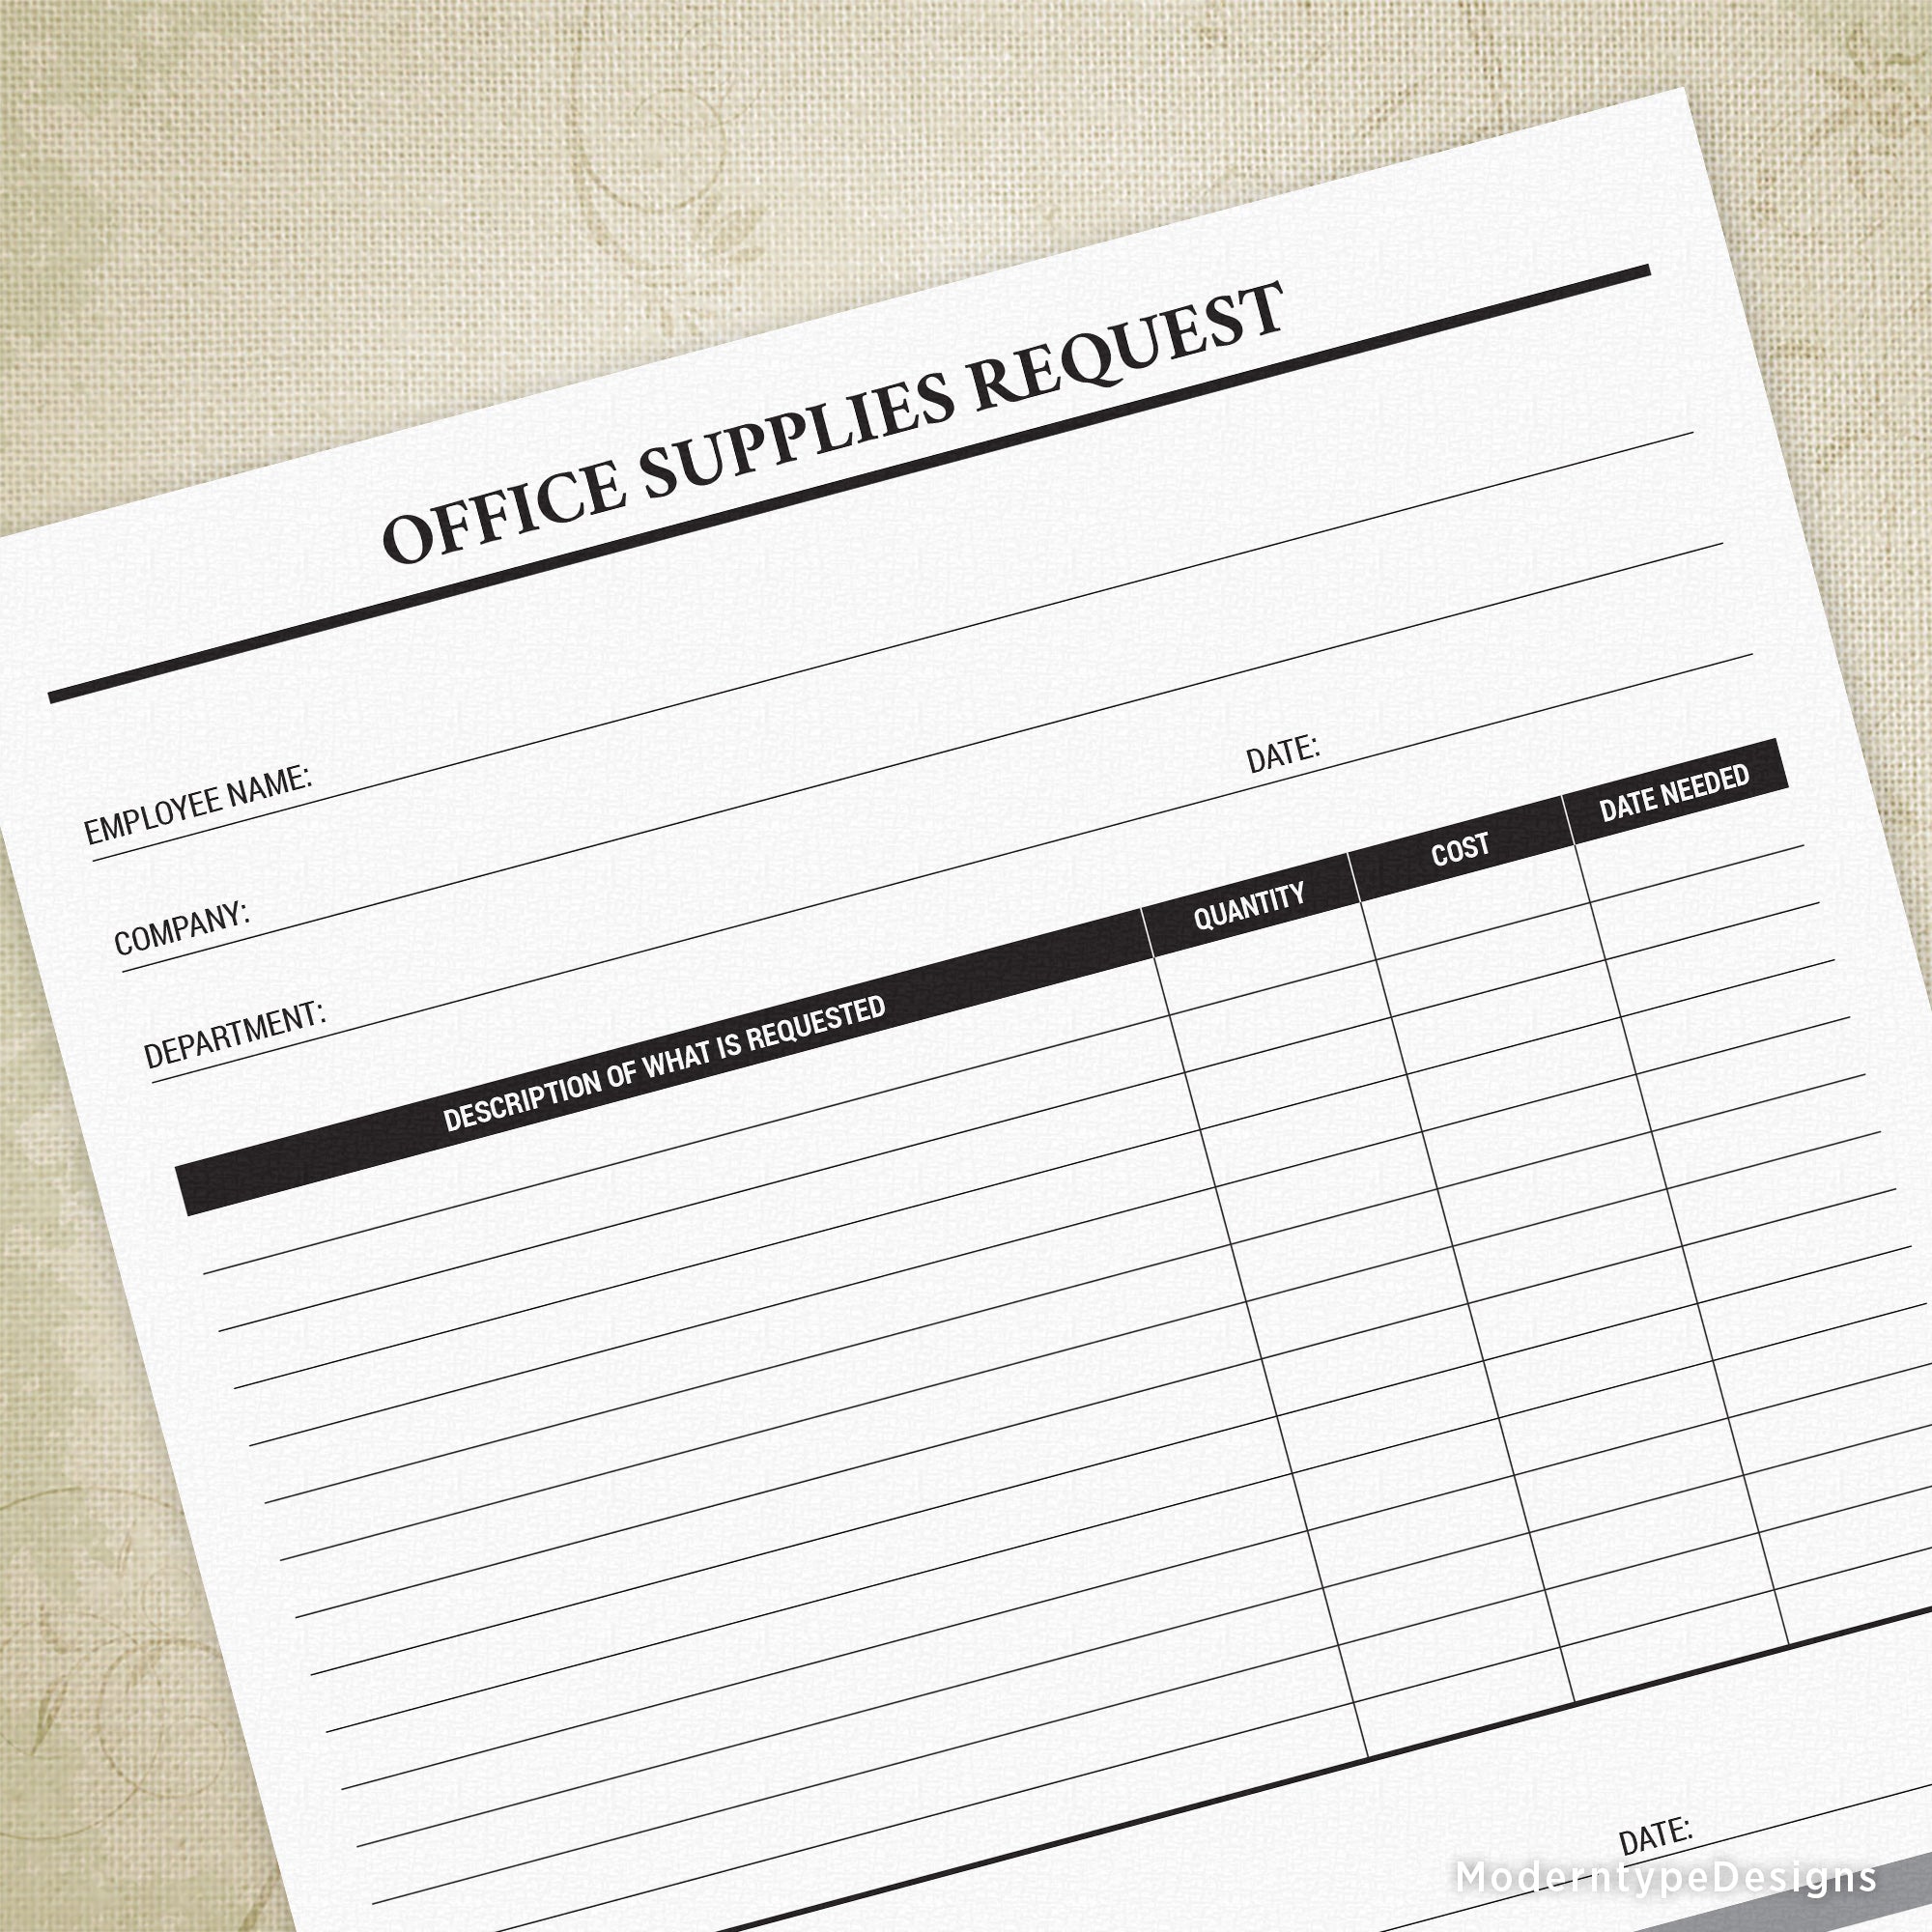 Office Supplies Request Printable Form